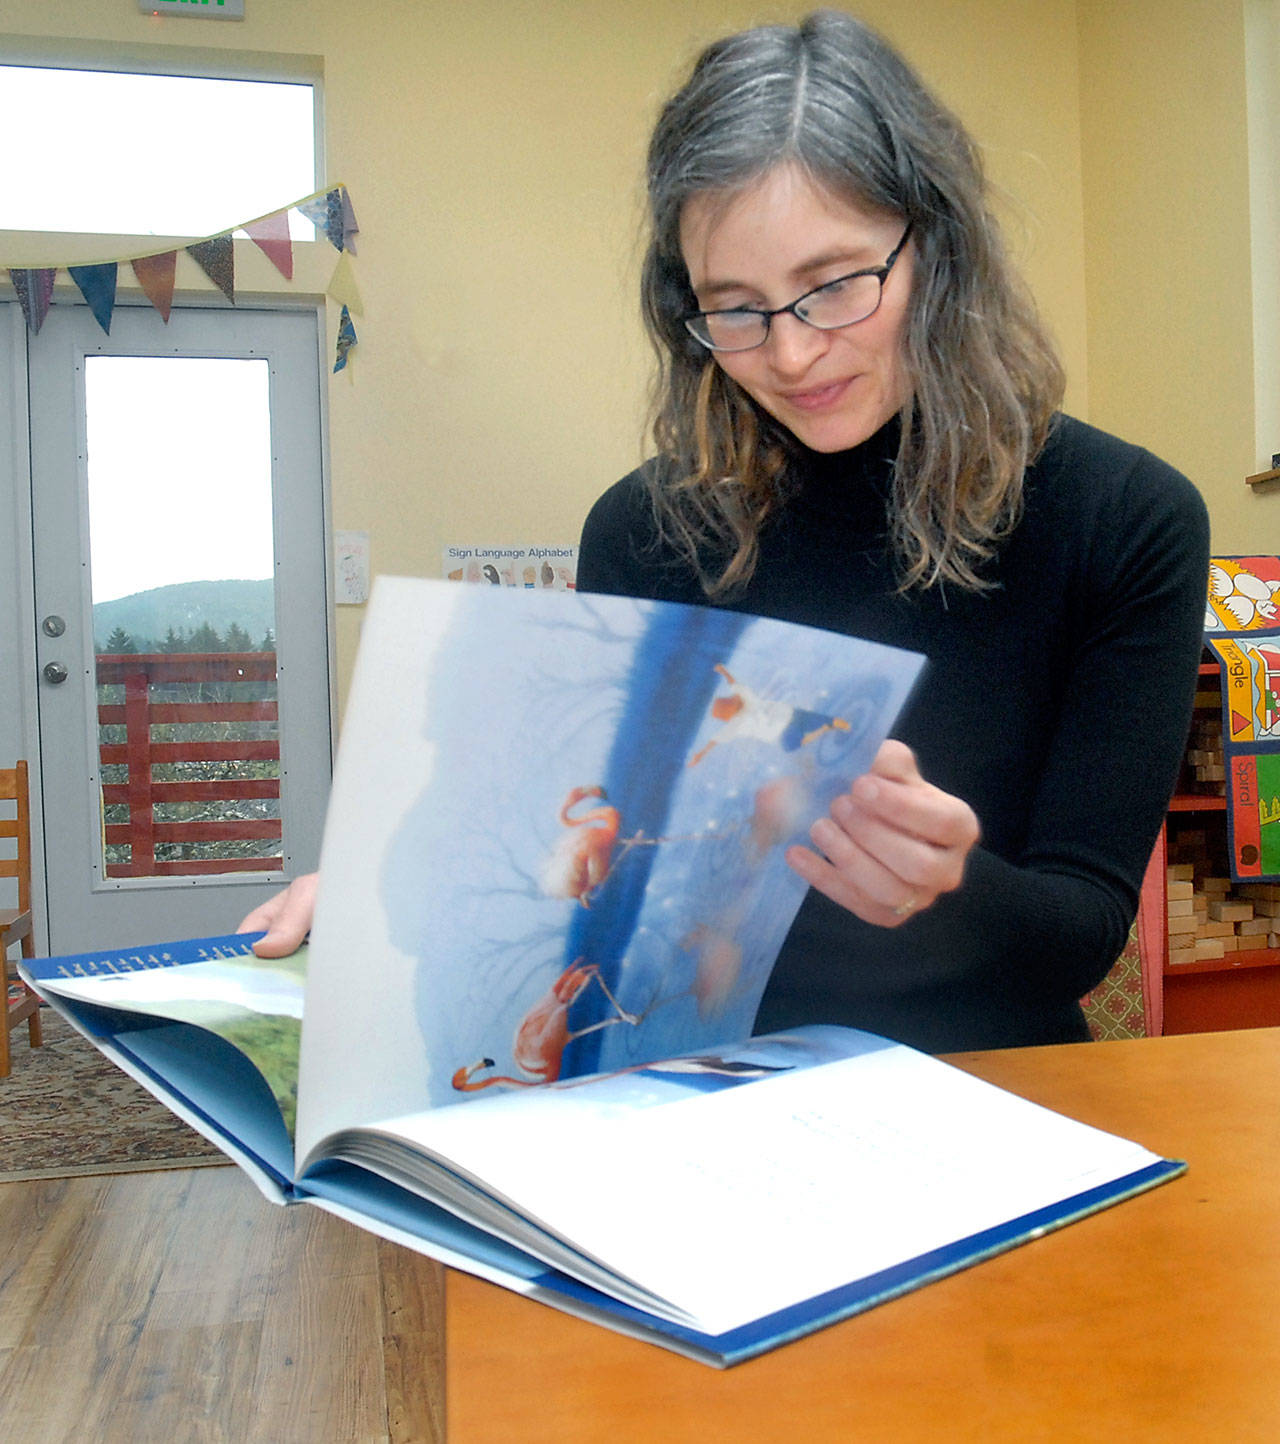 Bonnie Schmidt of Port Angeles leafs through “Wherever You Are, My Love Will Find You” by Nancy Tillman, a book that helped inspire Schmidt’s “Love Sparkle the World” project to promote world change through reading. (Keith Thorpe/Peninsula Daily News)